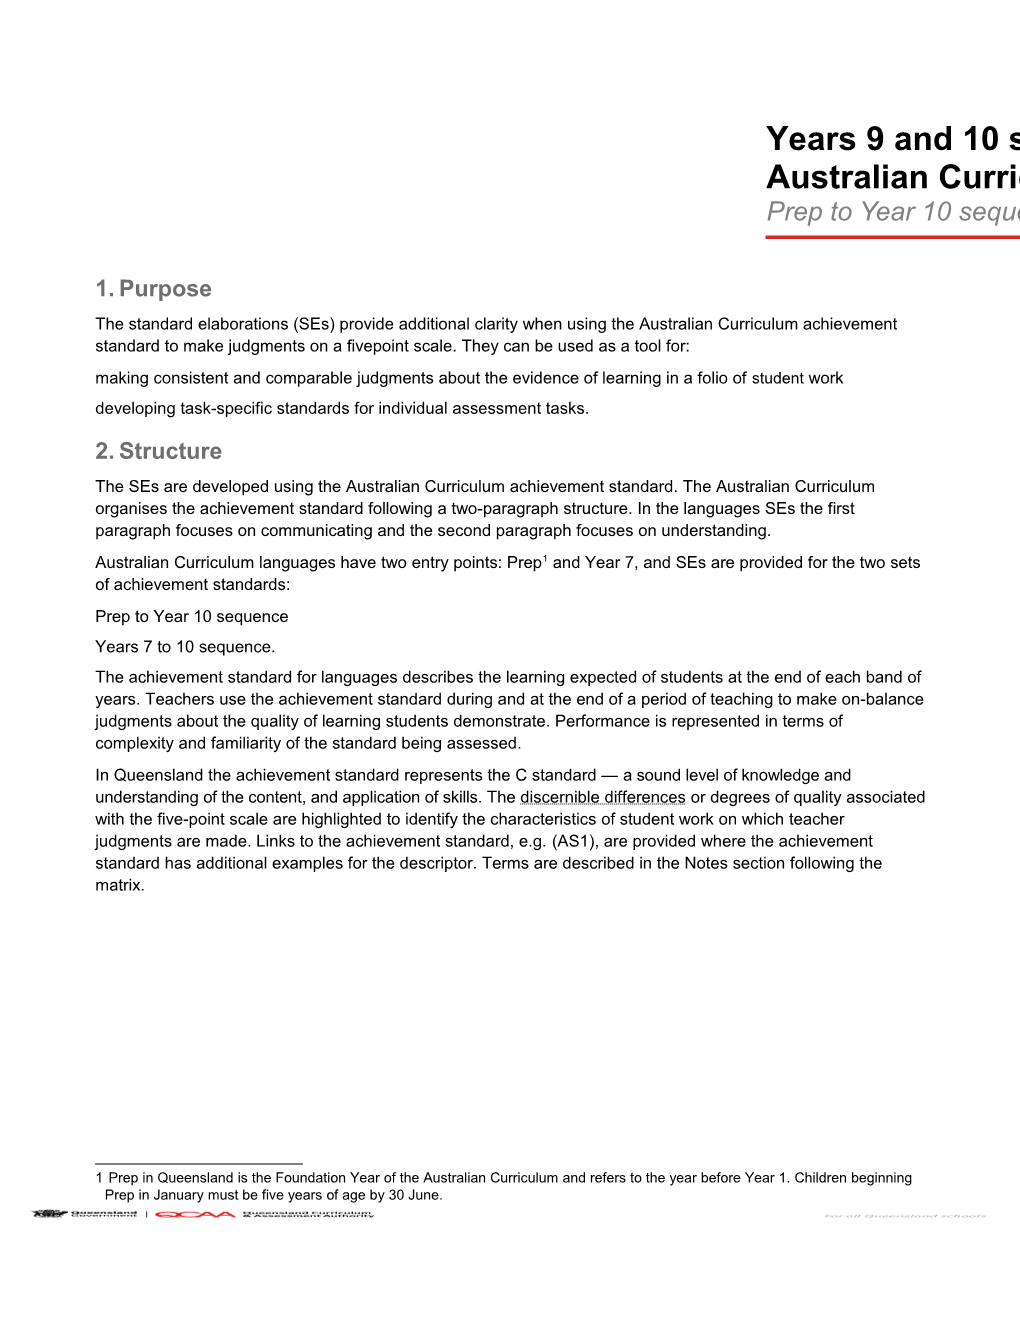 Years 9 and 10 Standard Elaborations Australian Curriculum: French